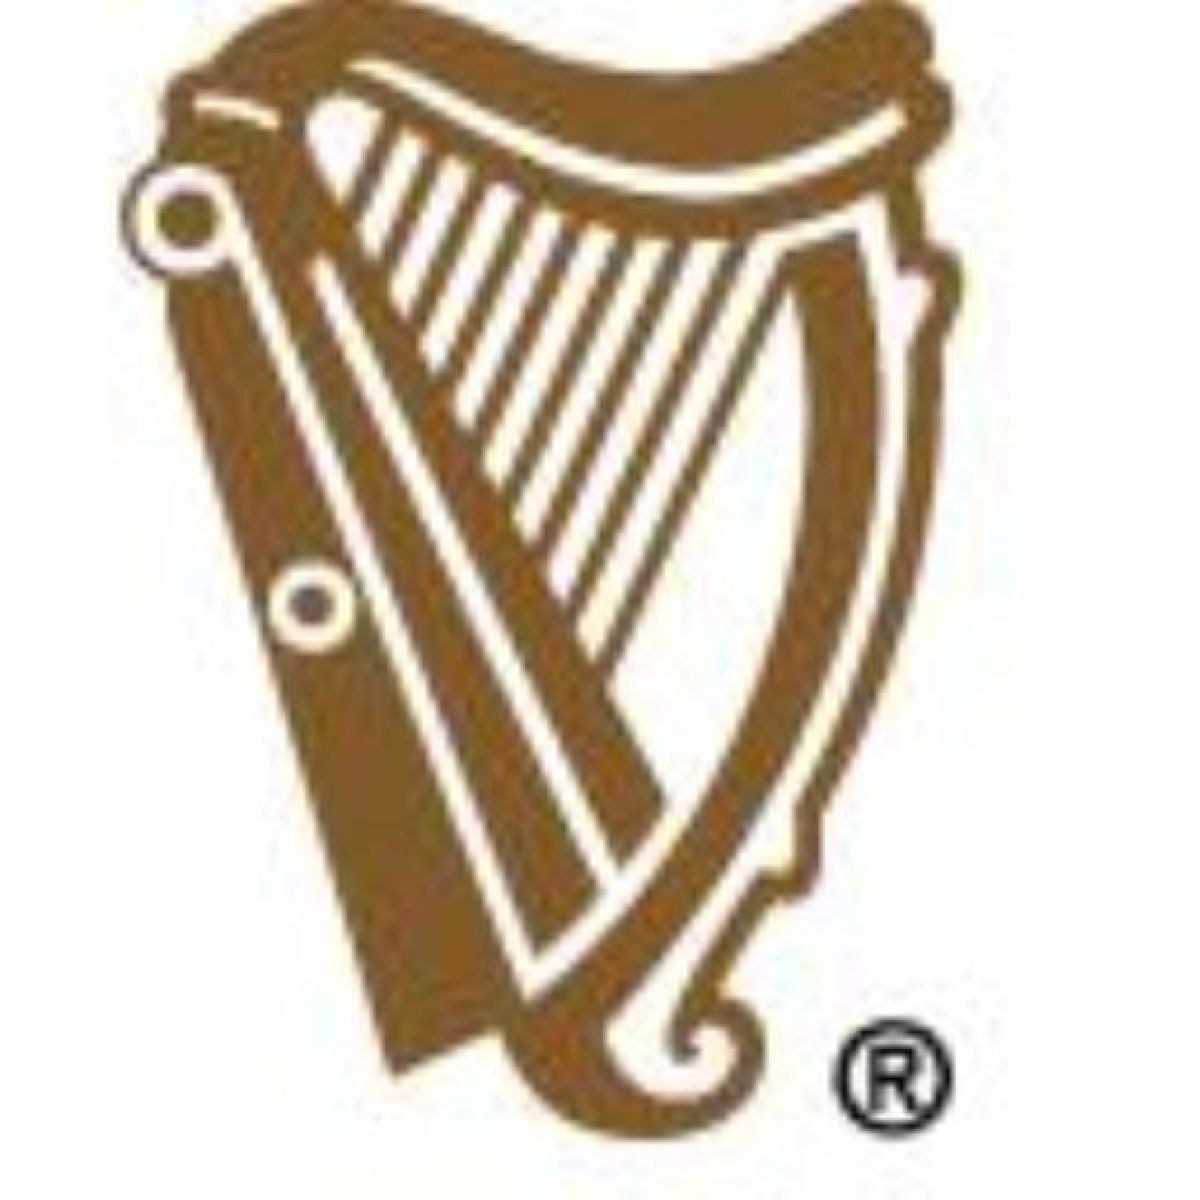 State feared guinness.